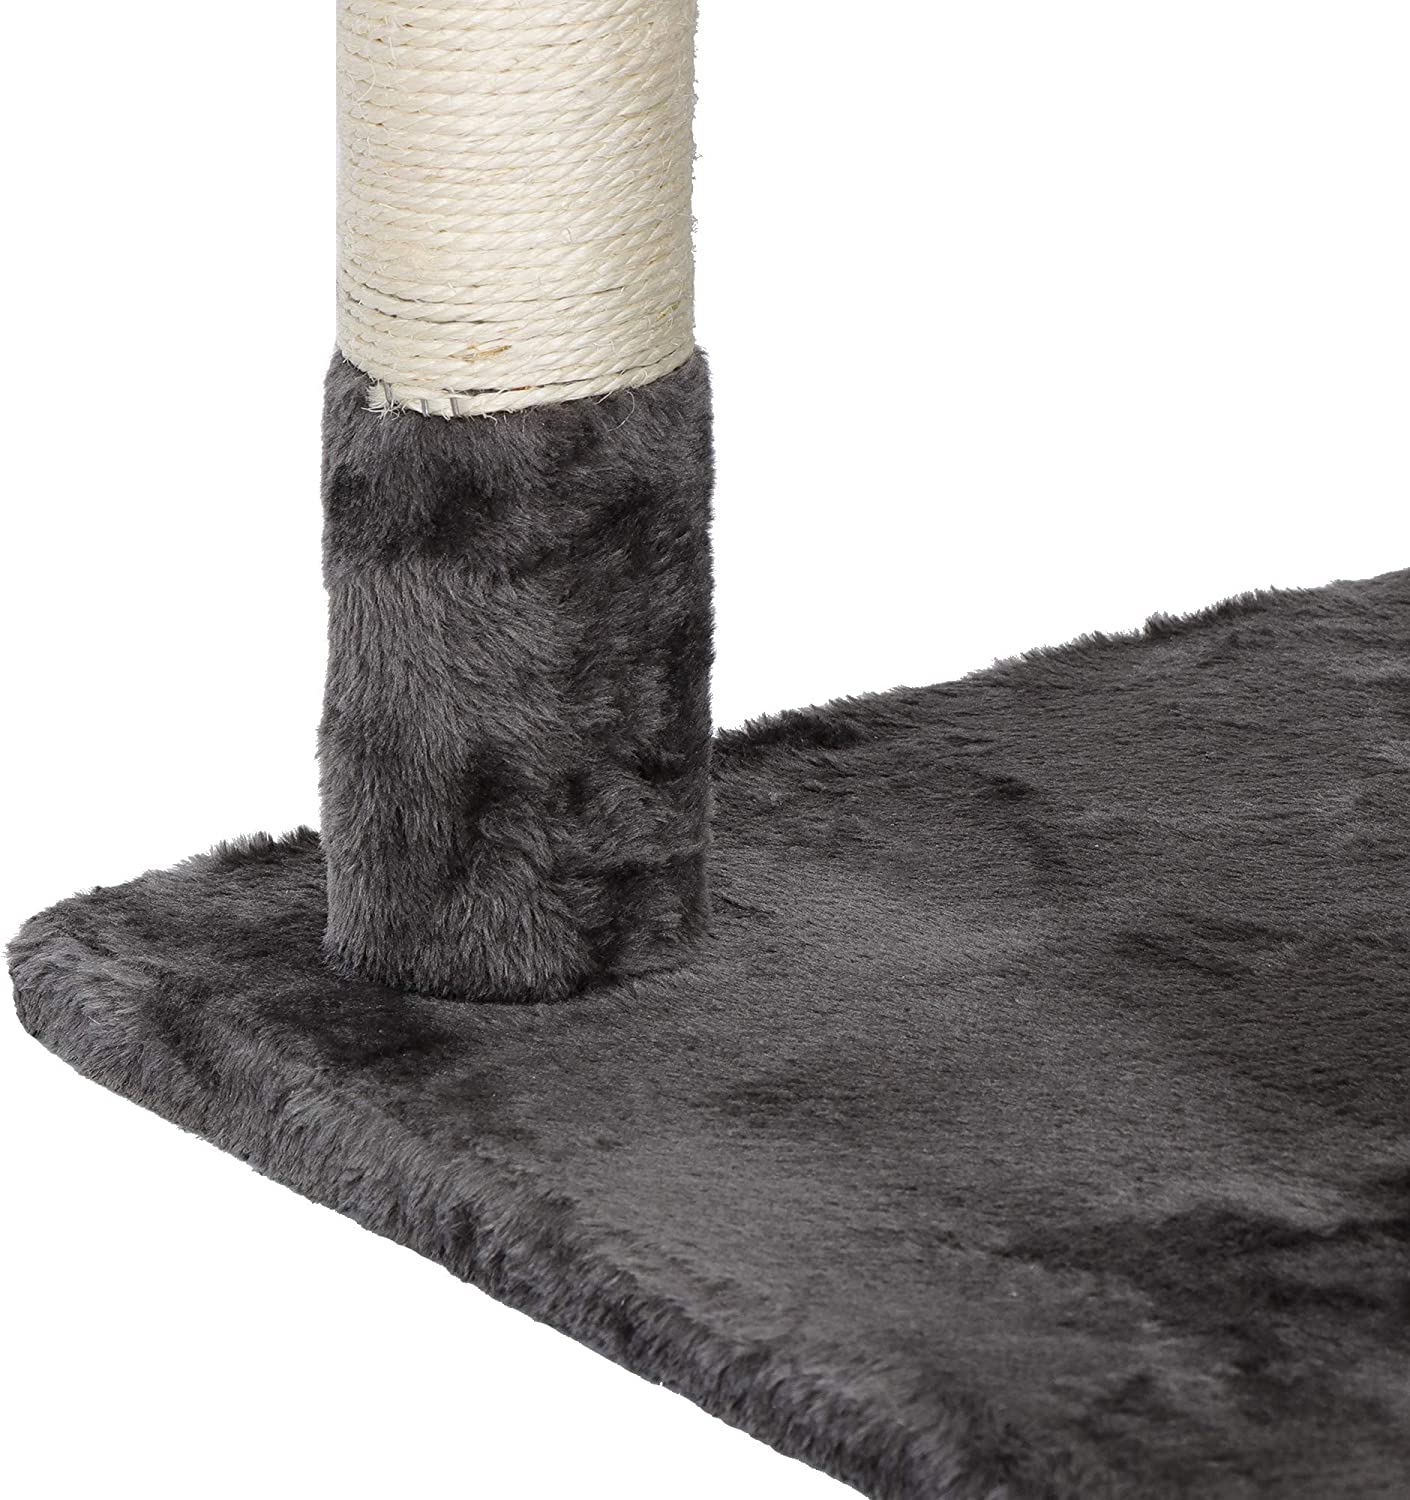 79 Inch Cat Tree, Multi-Level Cat Tower with Scratching Posts and Play House, Indoor Cat Furniture Condo Kitty Activity Center